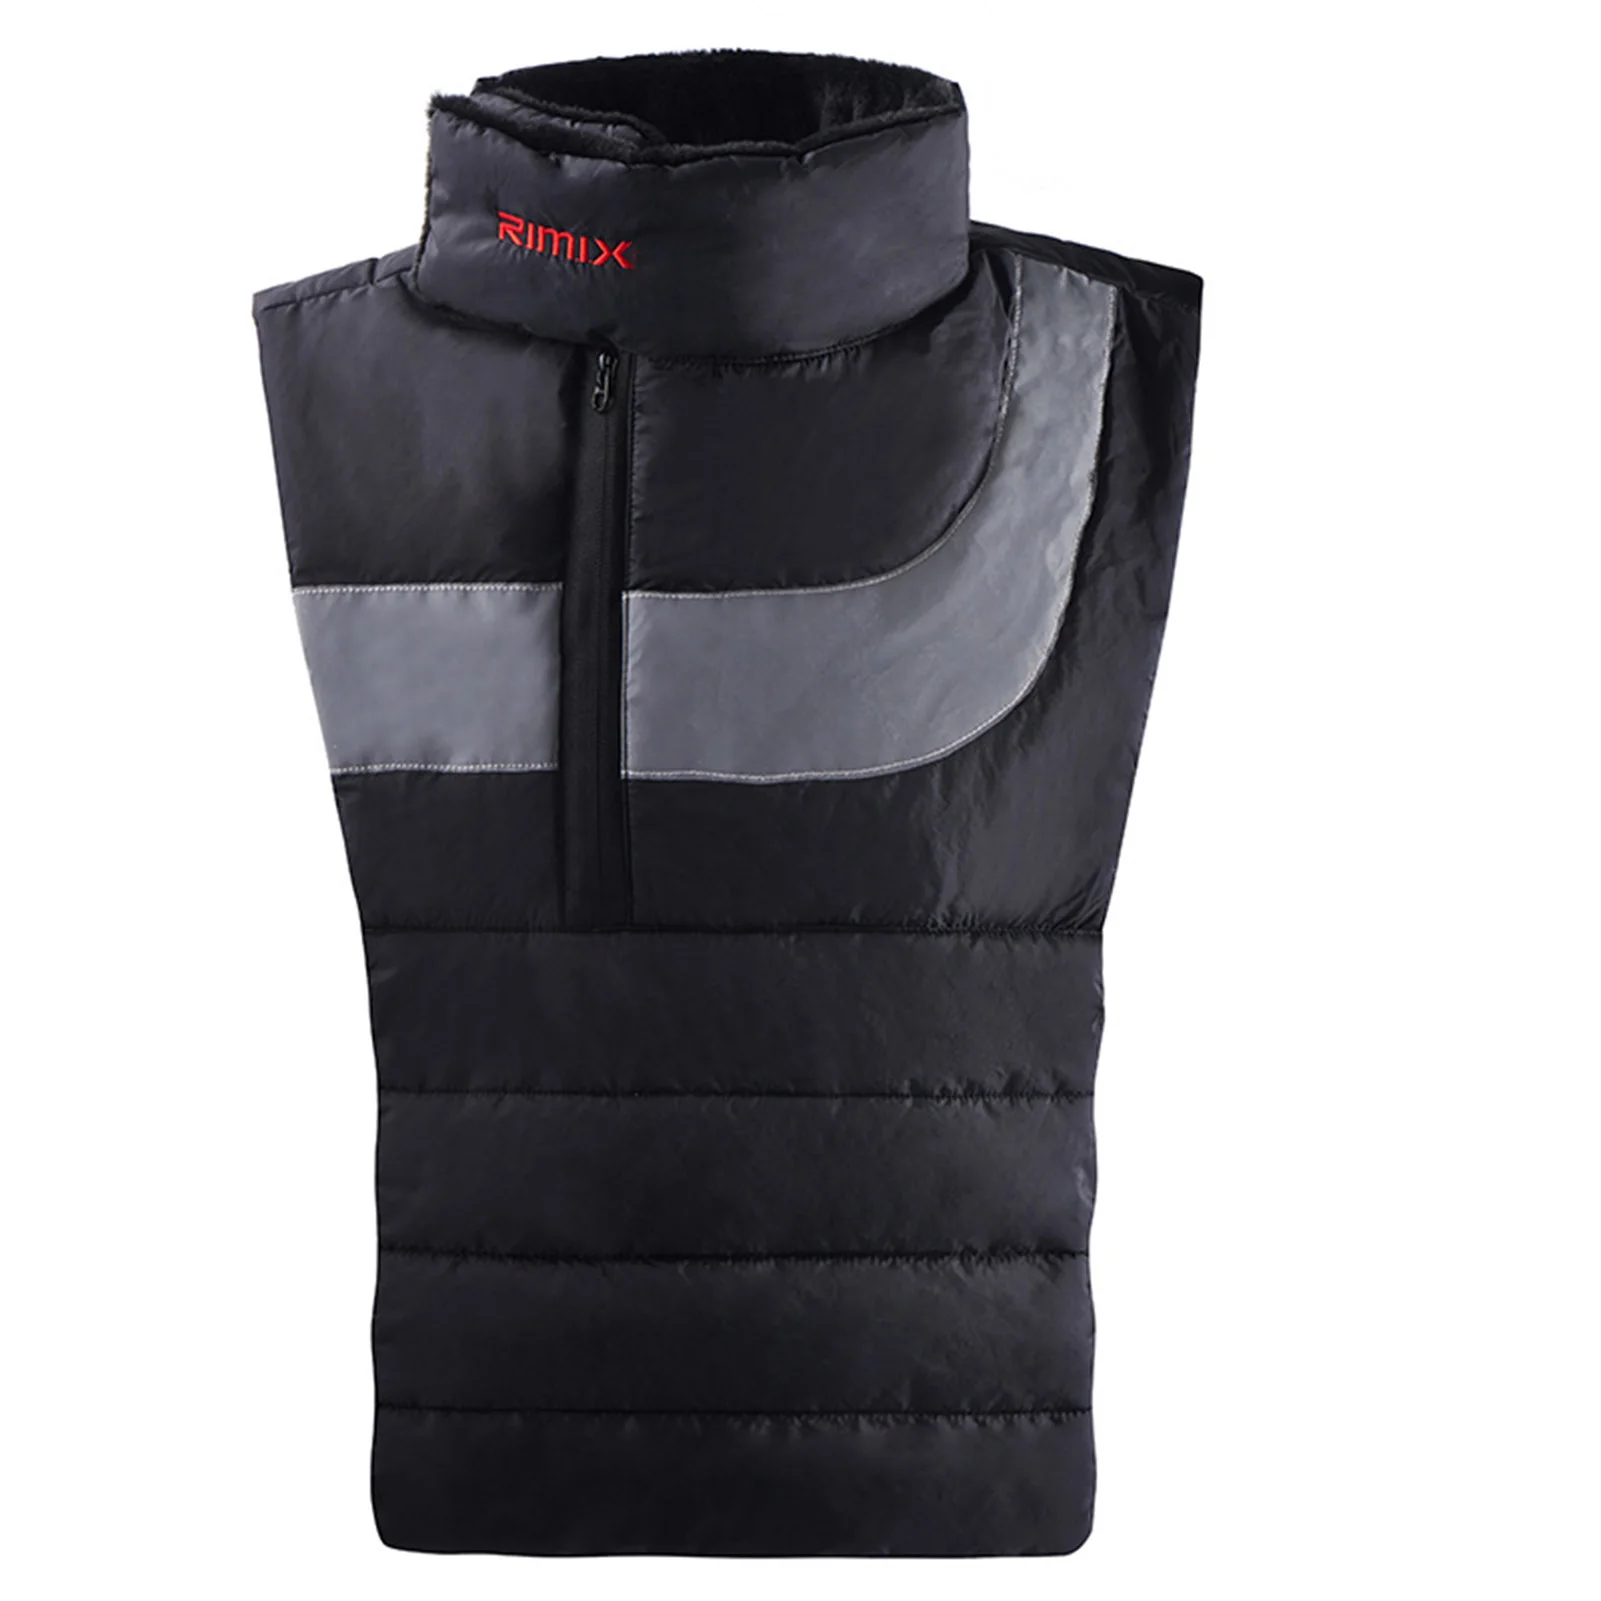 Extended Max 78% OFF Max 69% OFF Water-resistant Neck Warmer Reflective Motorcycling for